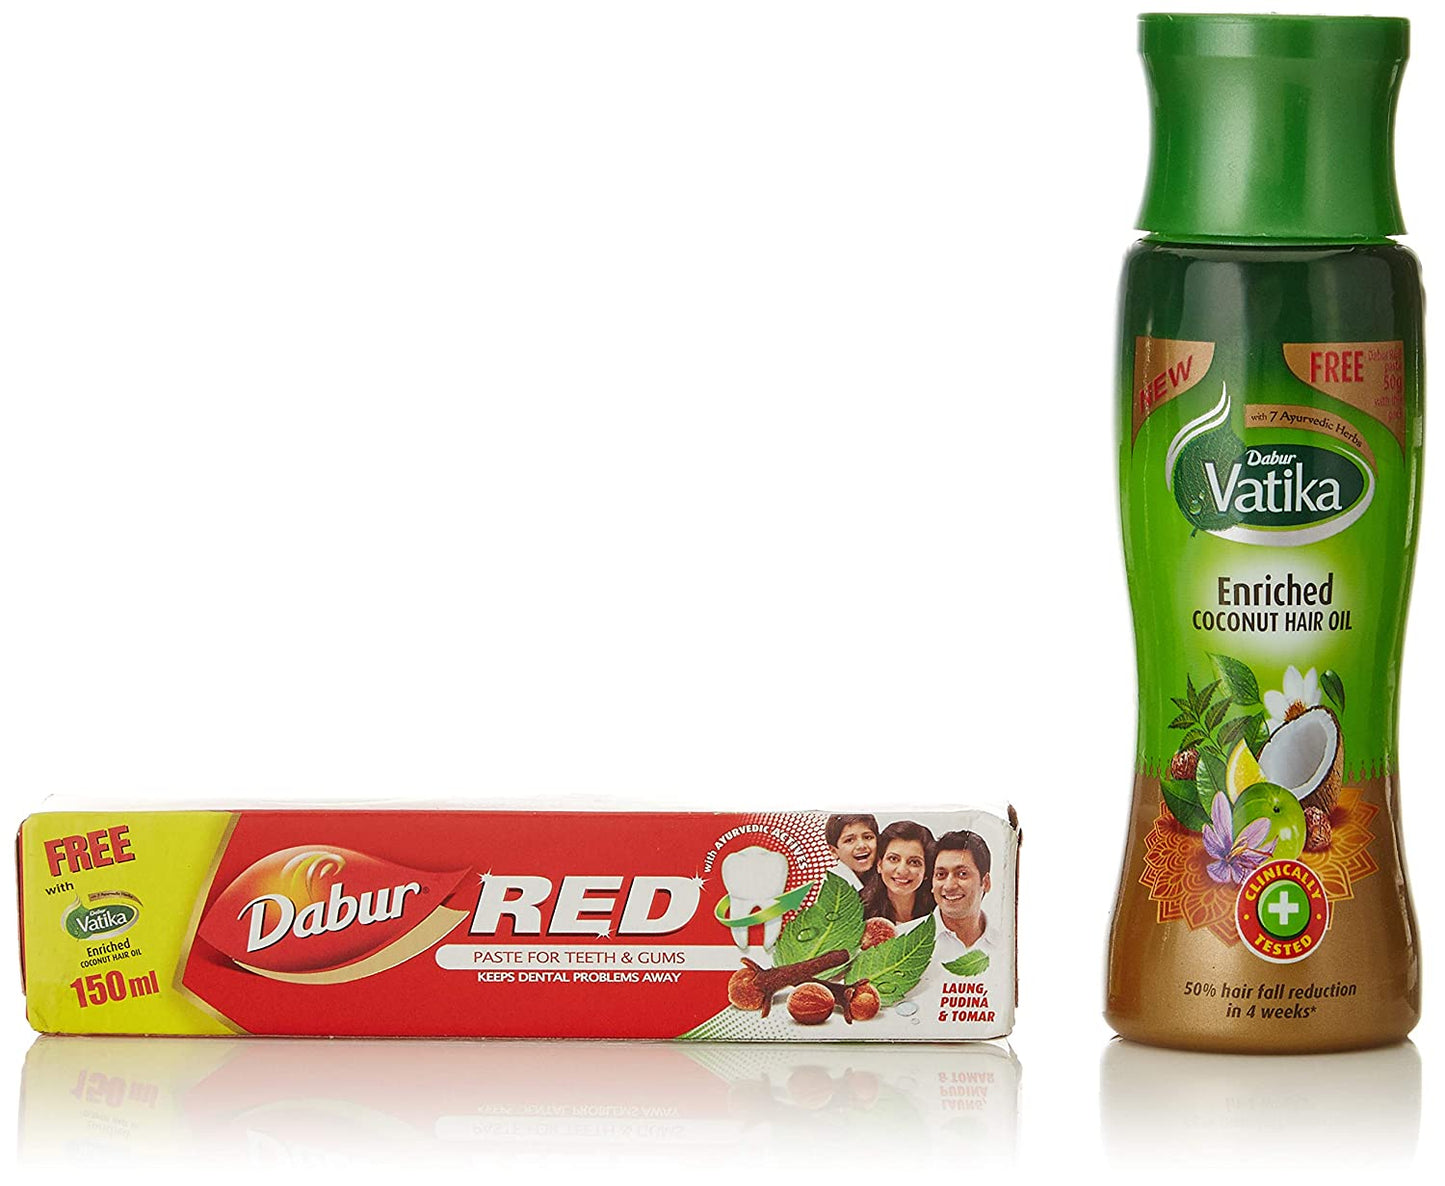 Dabur Vatika Enriched Cocount Hair Oil, 150 ml with FREE Dabur Red Tooth Paste 40g